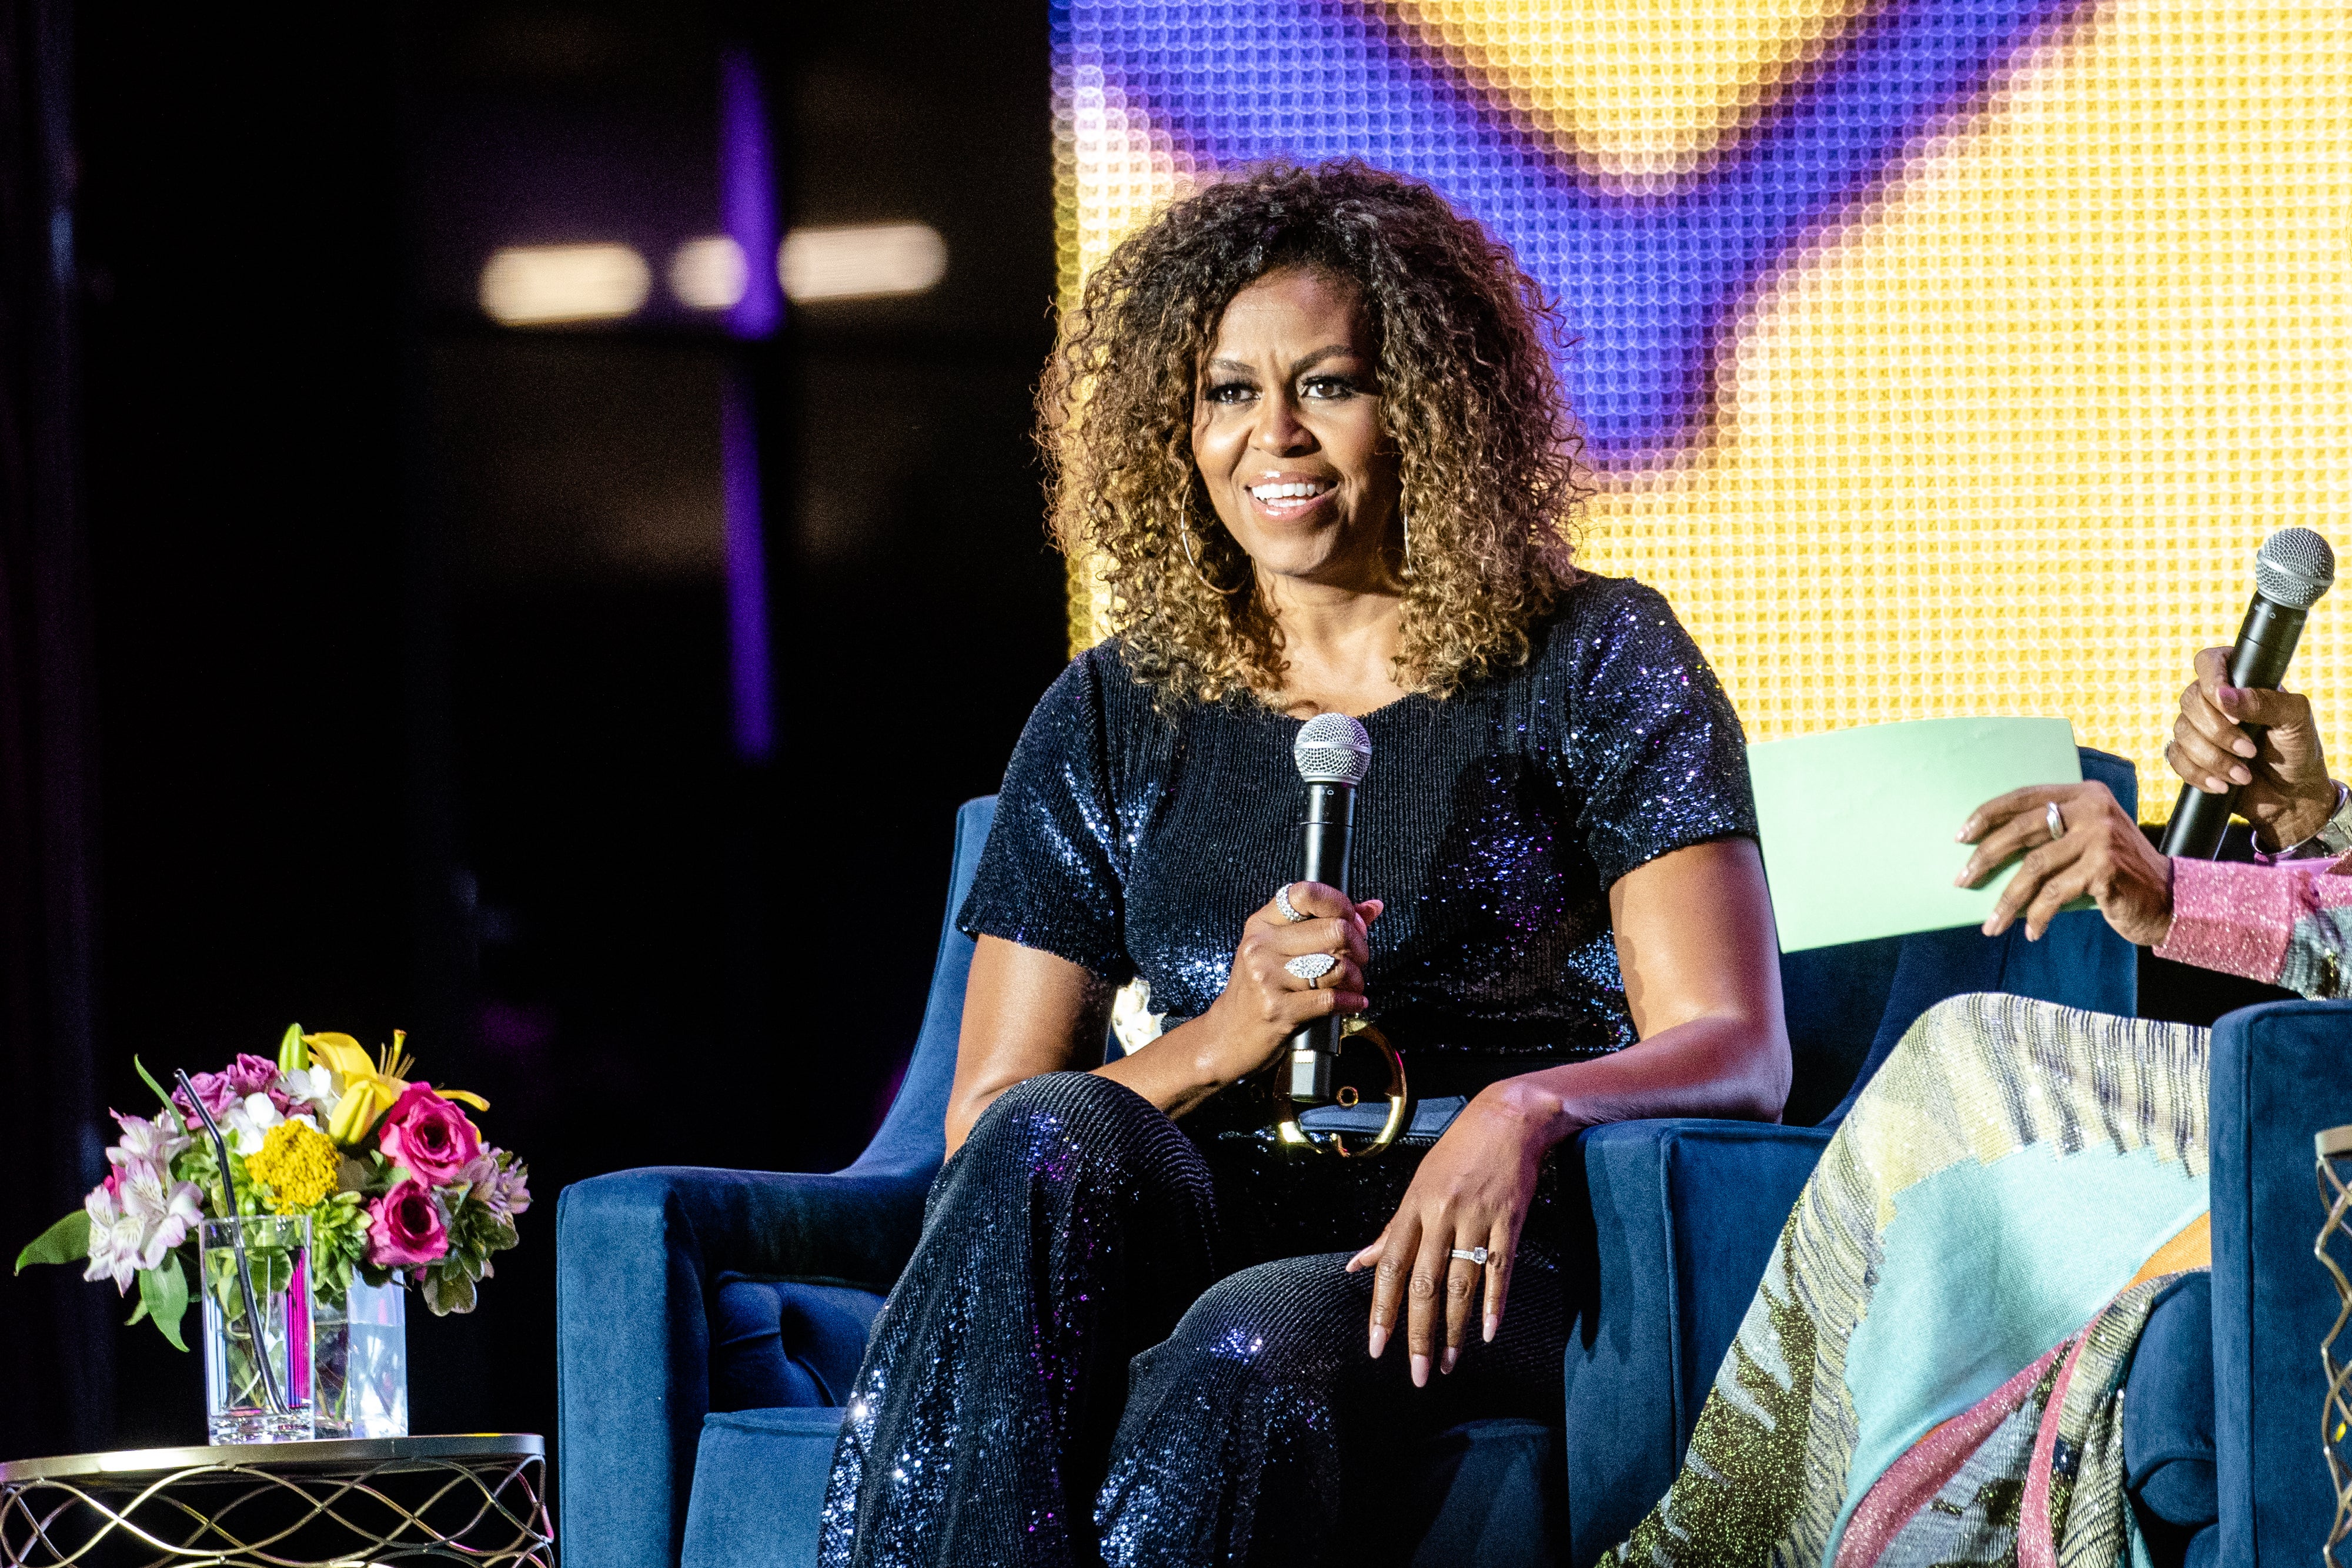 Michelle Obama Reveals Why Women Should Marry Their Equal At Essence Festival